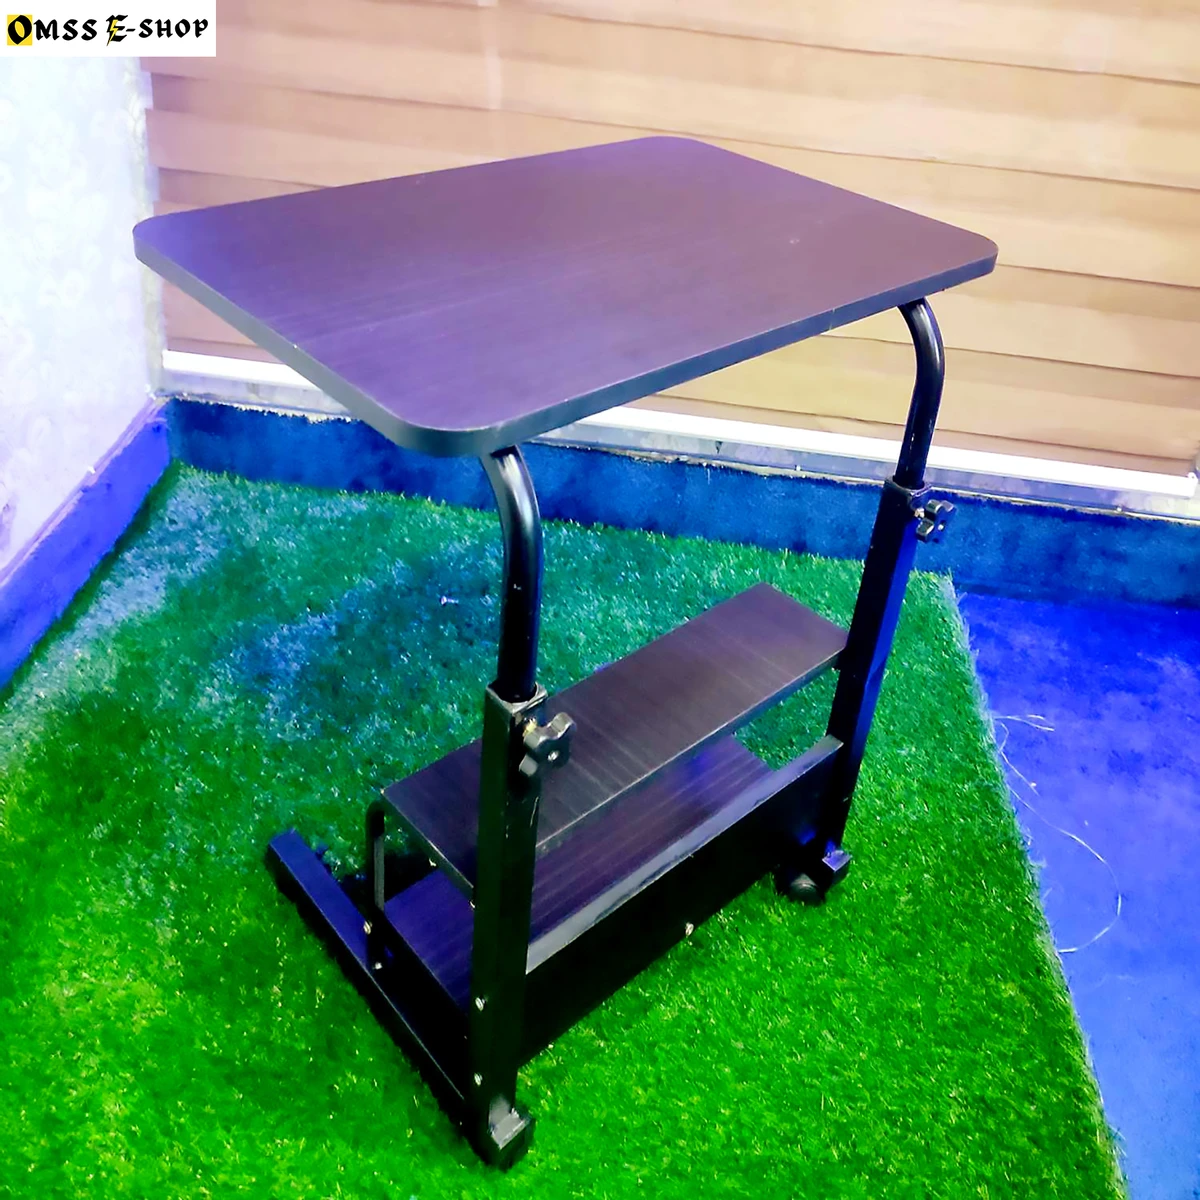 Adjustable Portable Table Laptop, Computer Stand, Cart Tray Side Table for Bed, Sofa, Hospital, Nursing, Reading, Eating RP-1650DH-RE